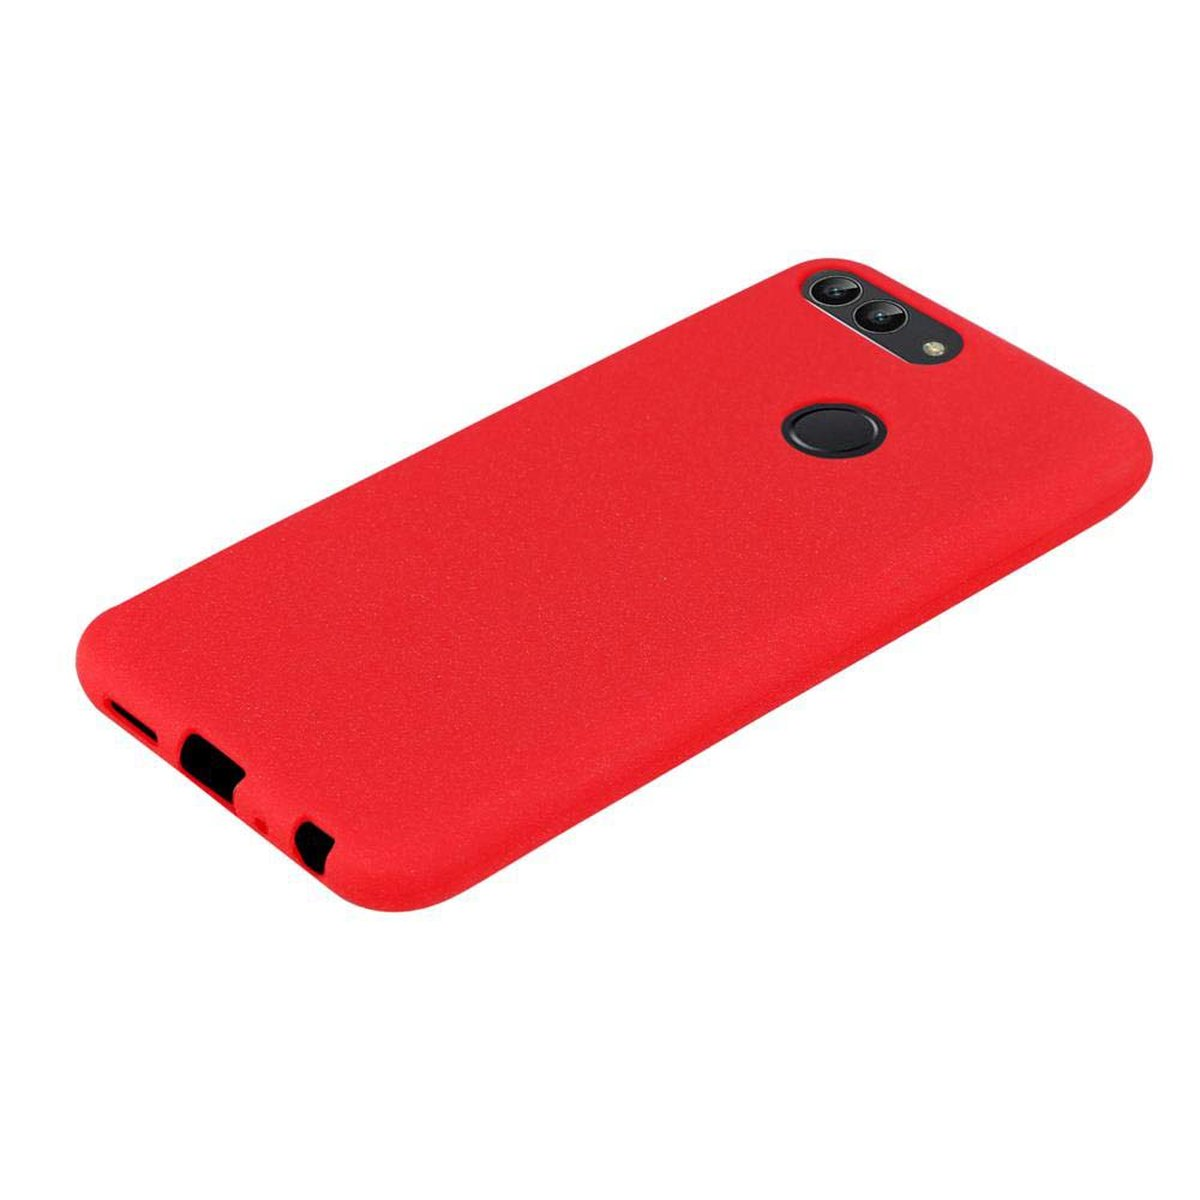 Enjoy Huawei, TPU CADORABO 2018 FROST Backcover, ROT 7S, Schutzhülle, / P Frosted SMART